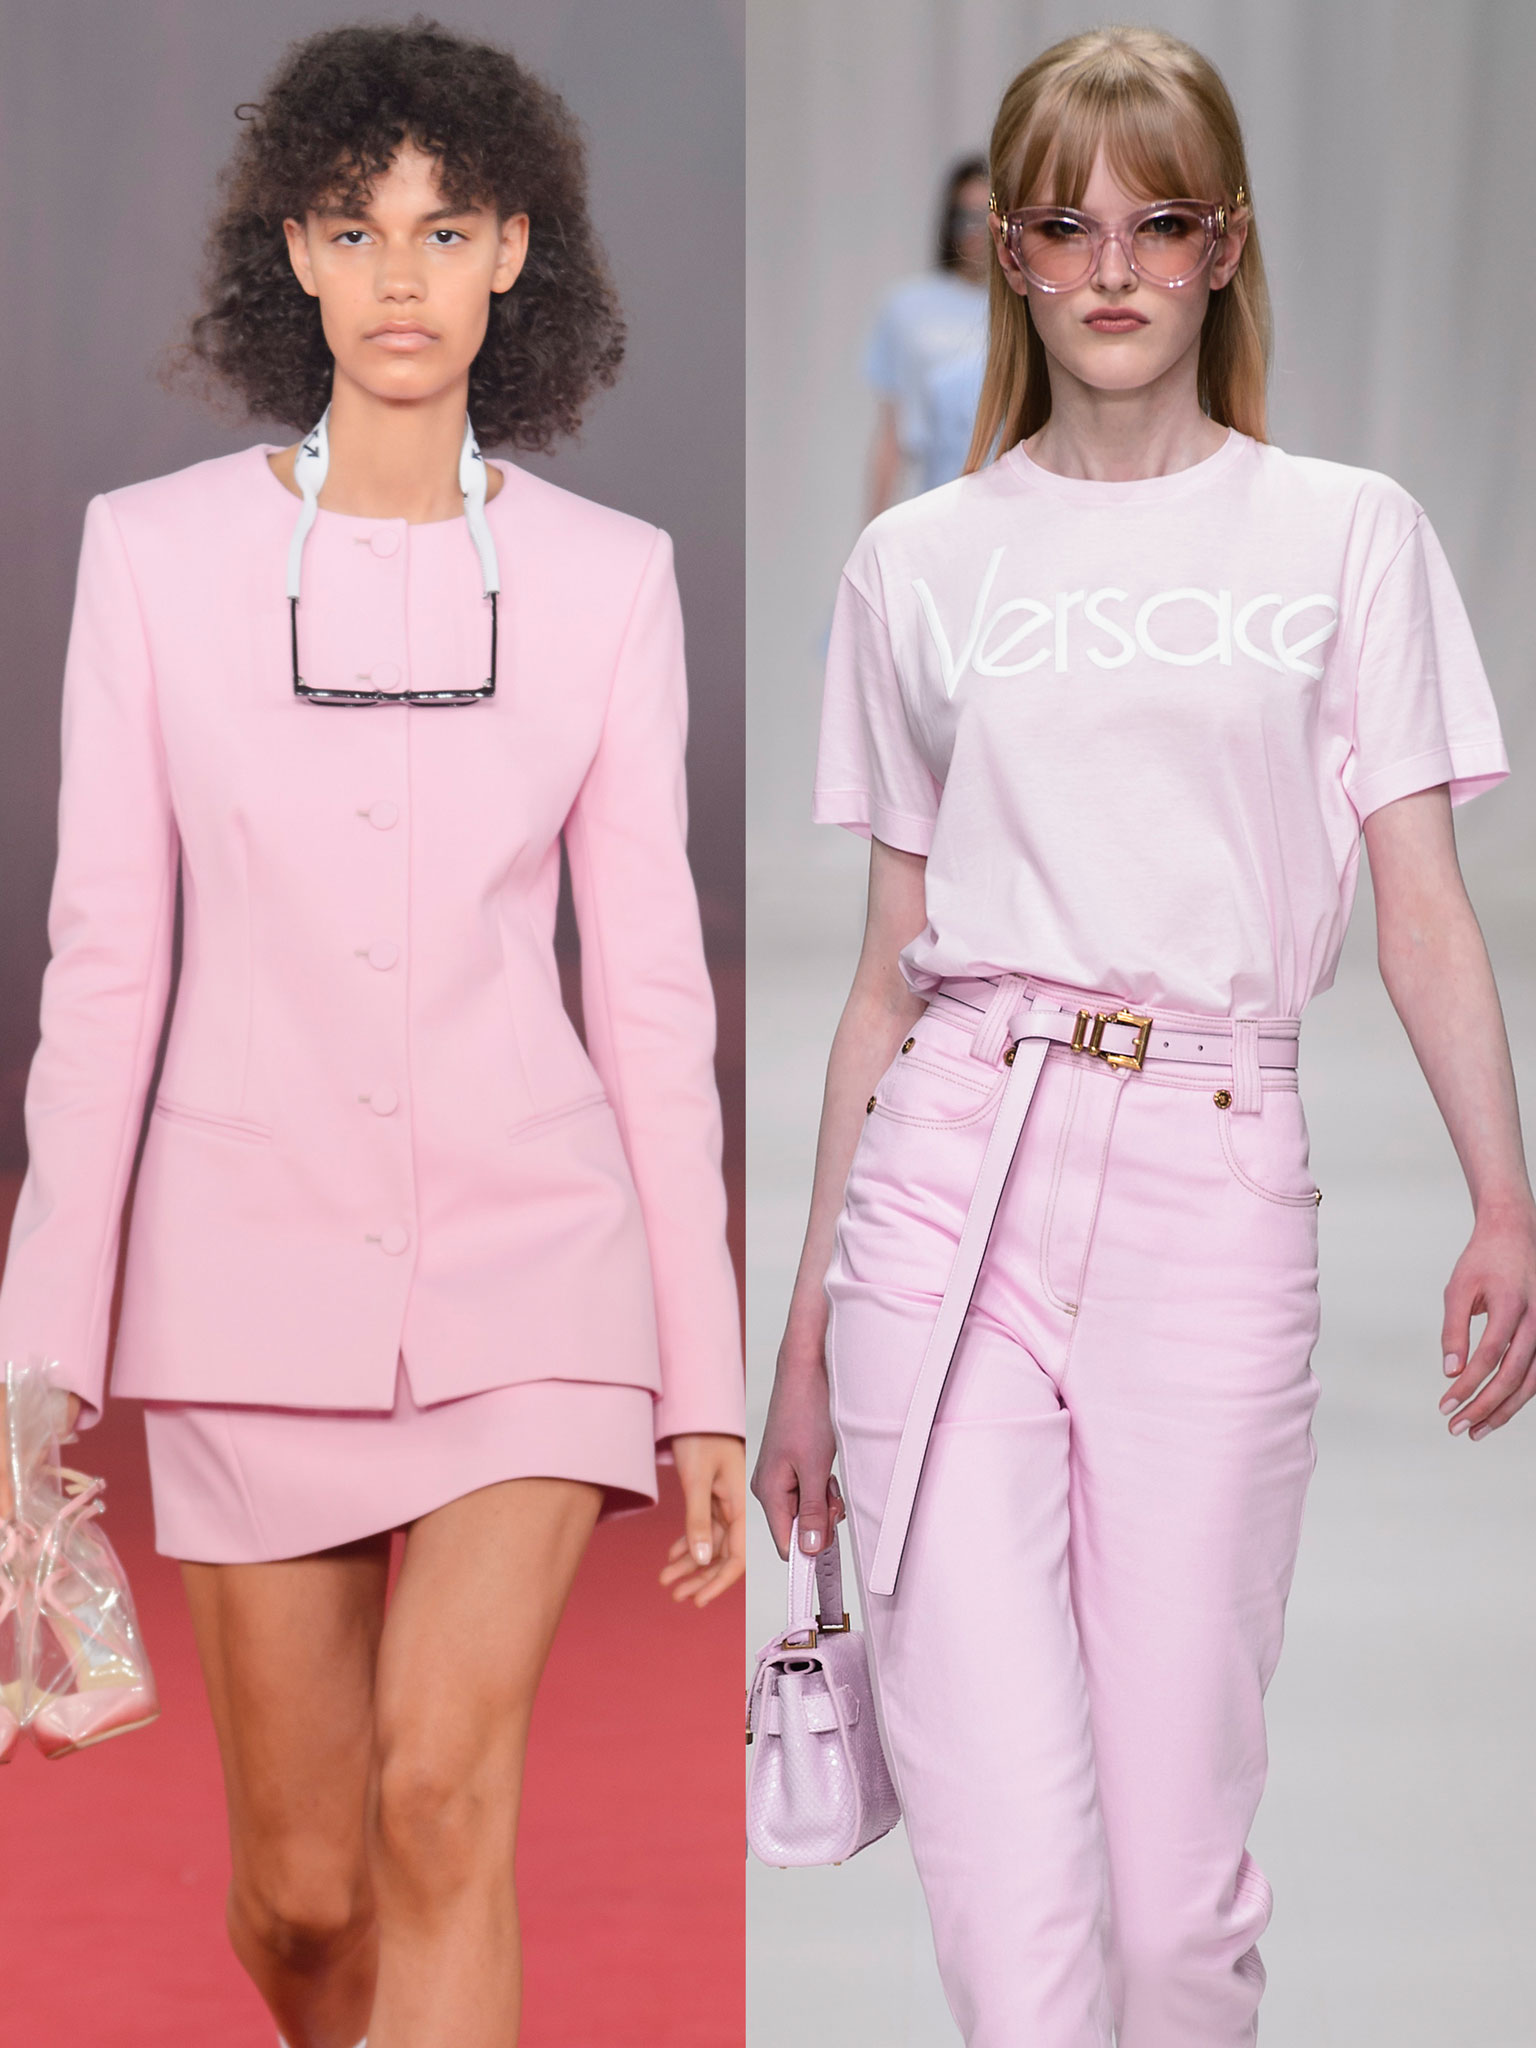 How To Wear Pink At Work: The Decade's Hottest Color